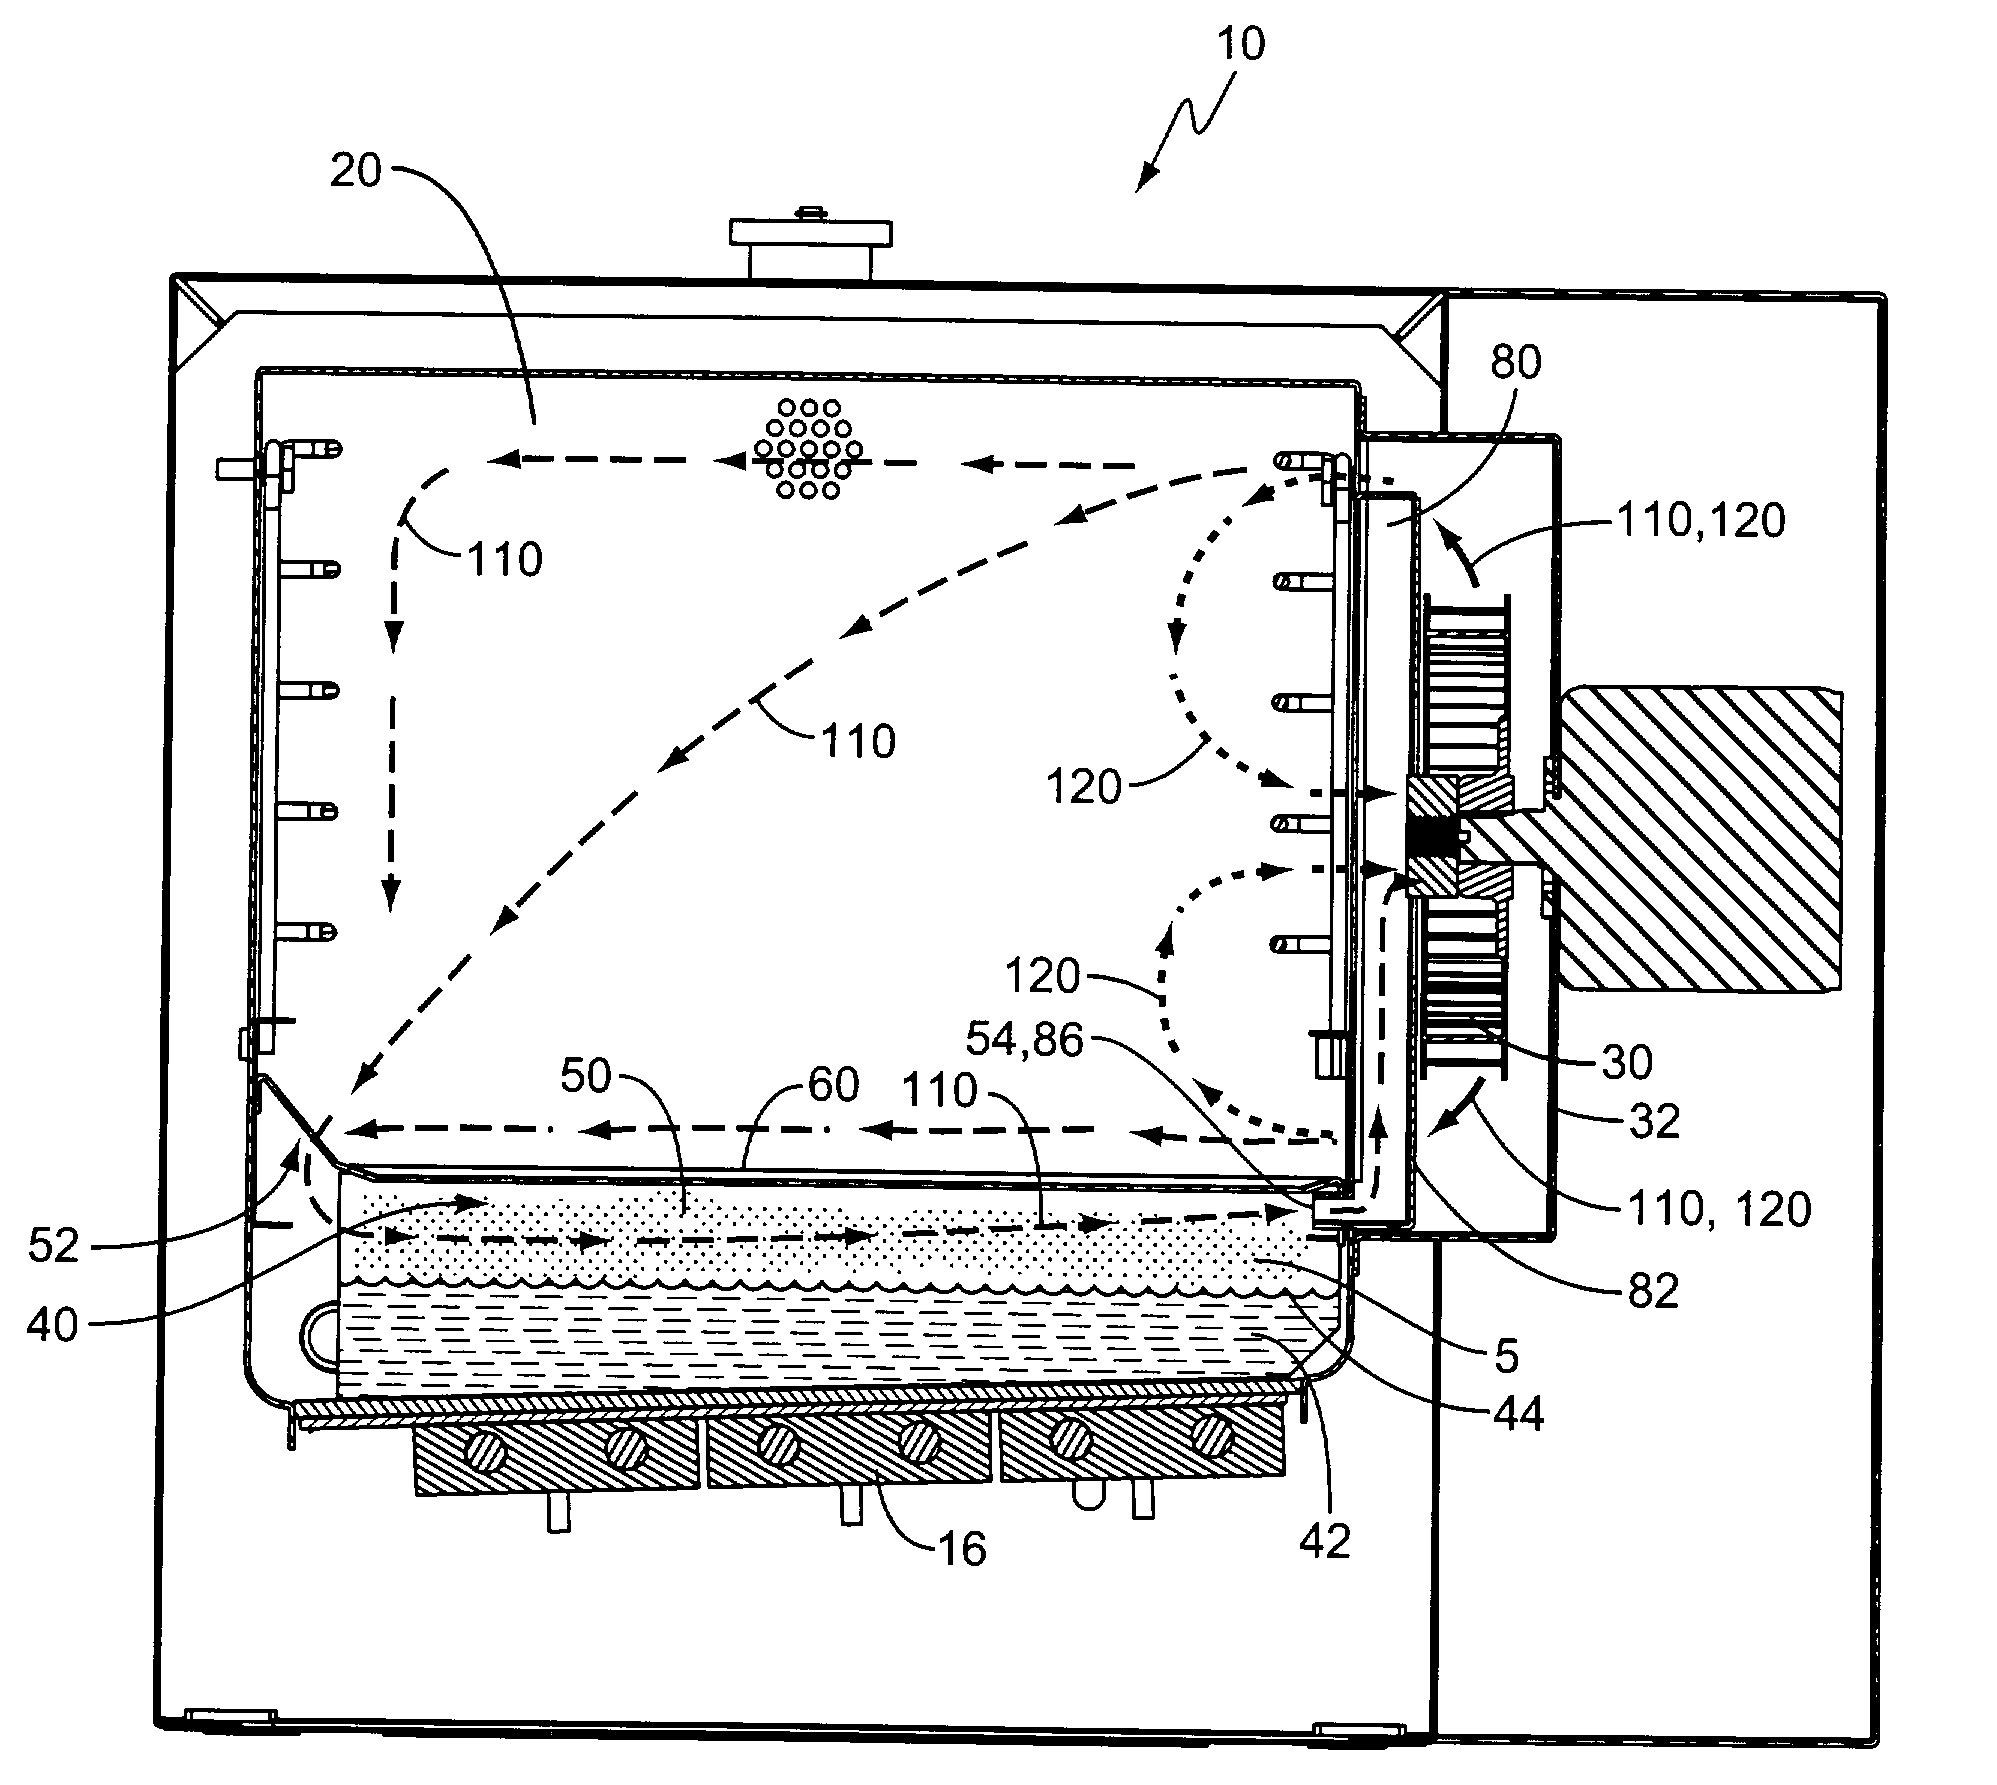 Convection steamer with forced recirculation through steam bath